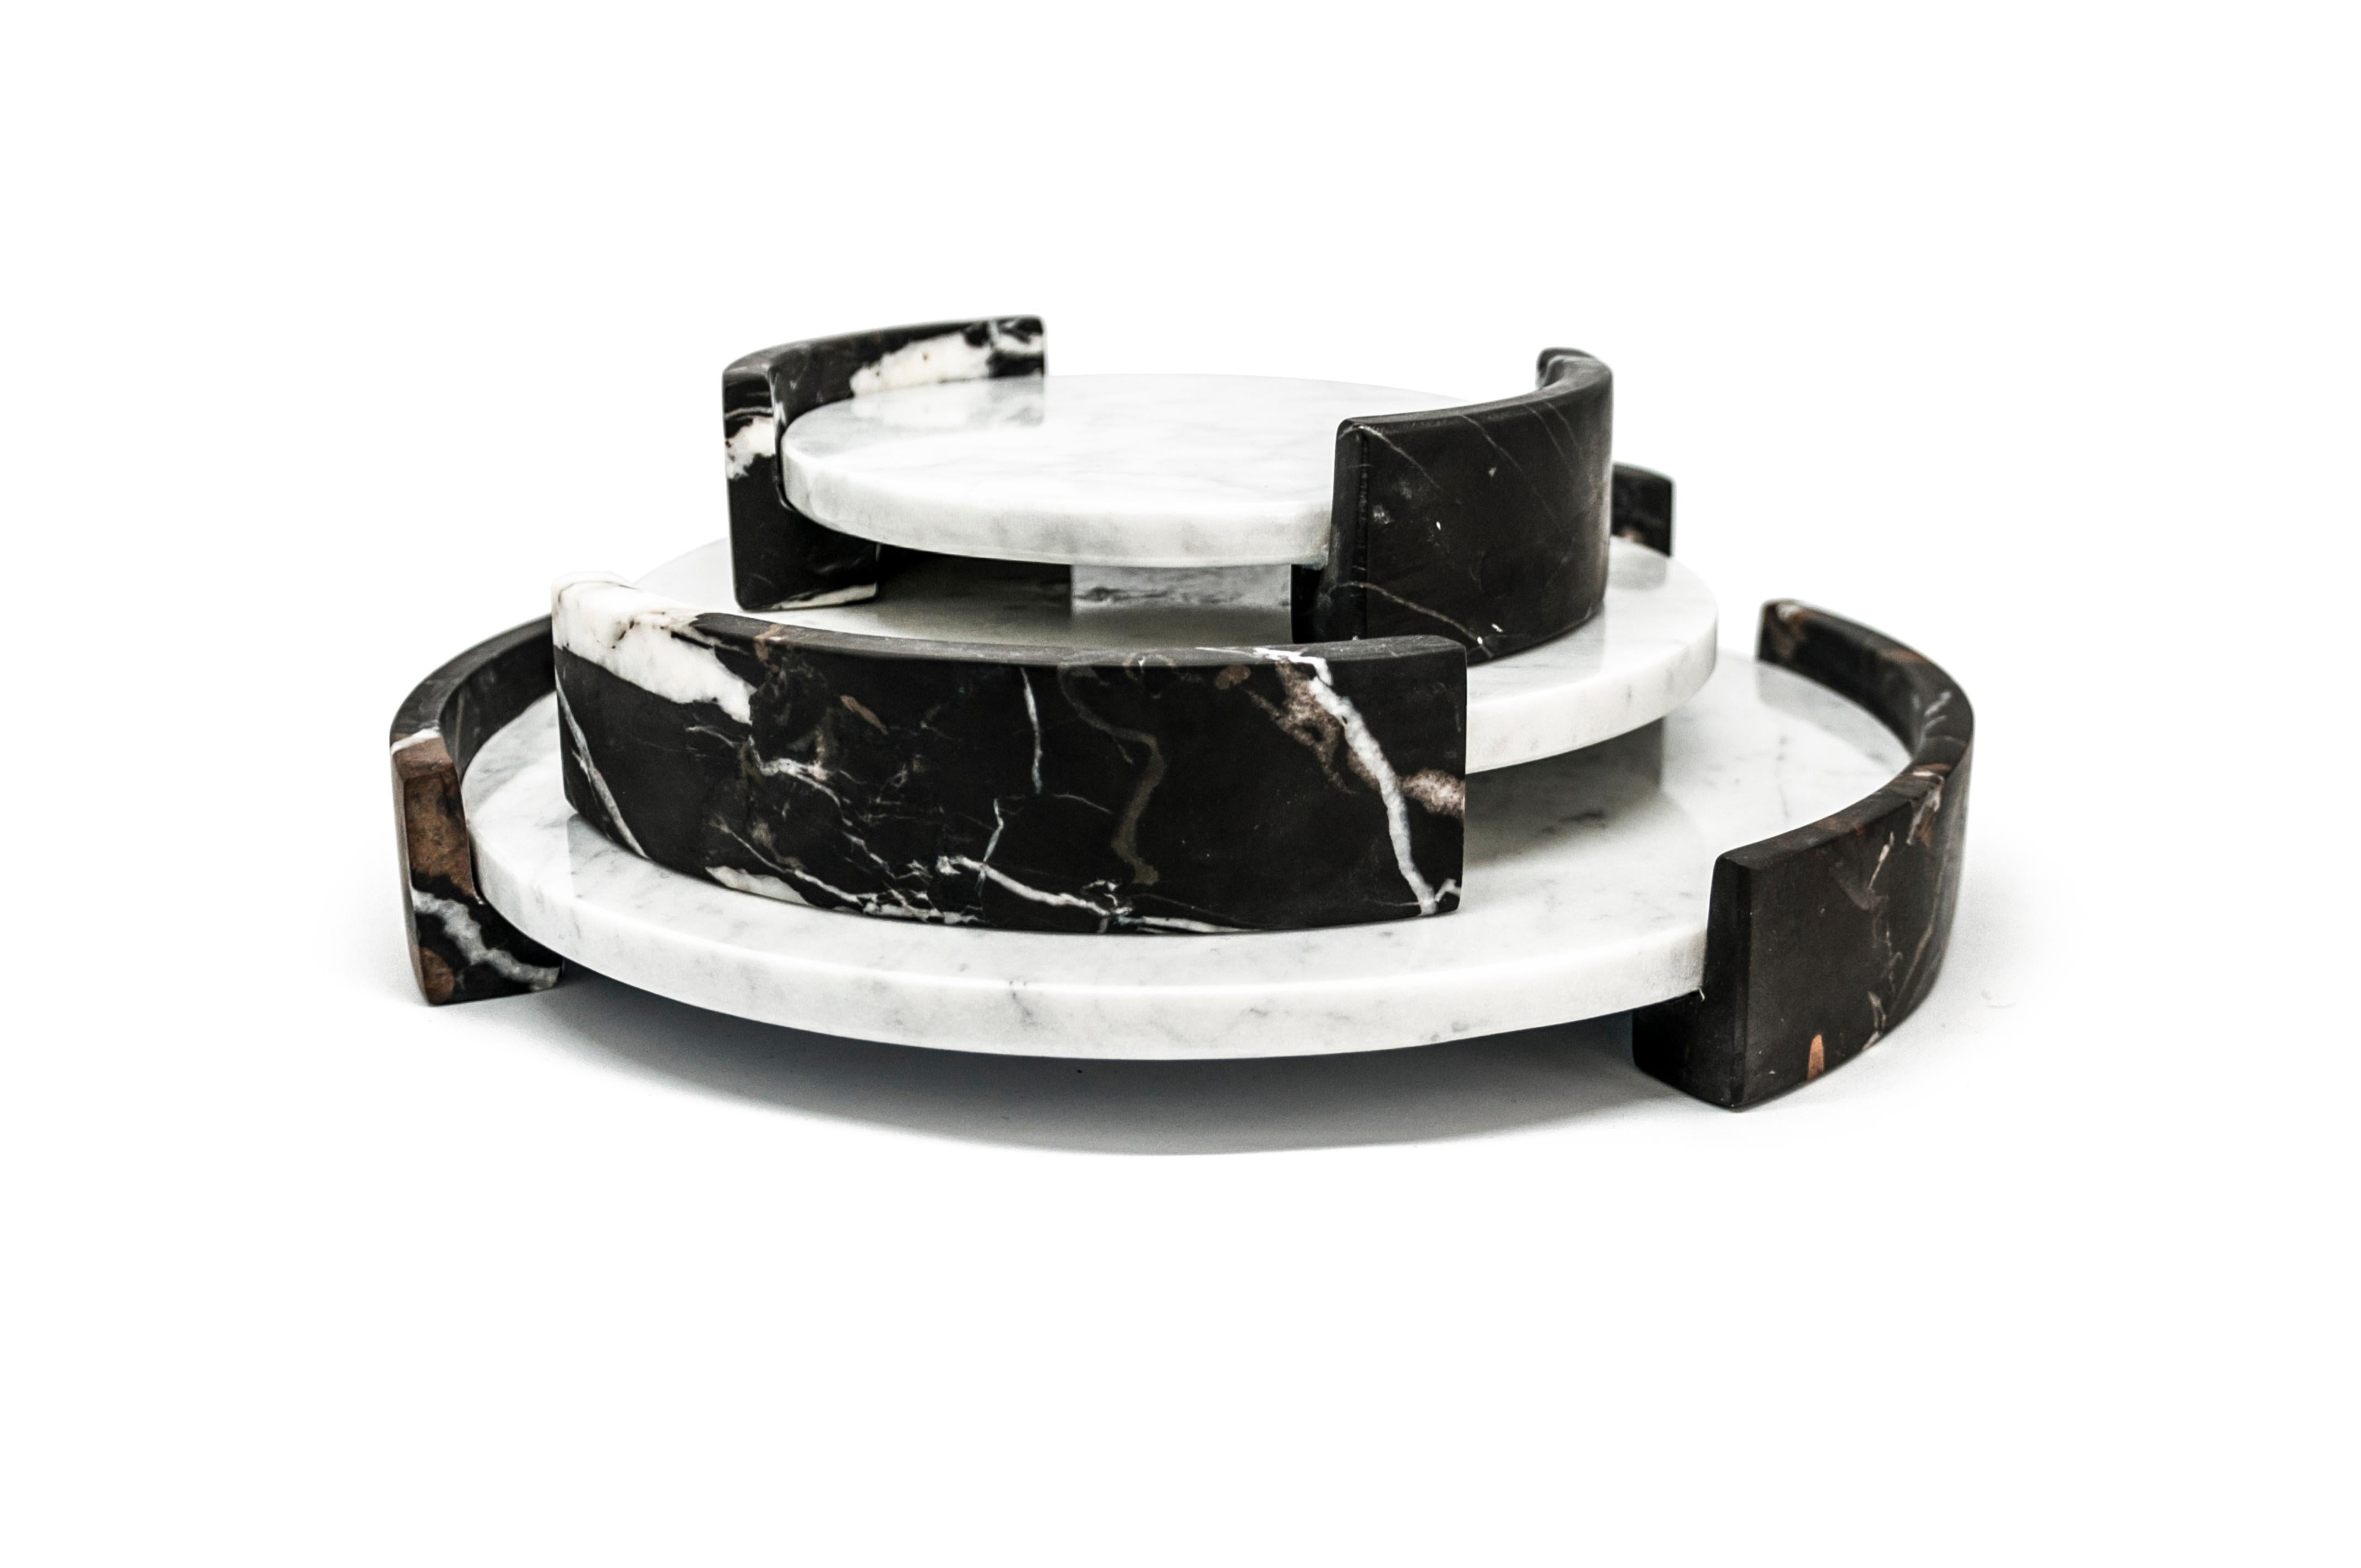 Hand-Crafted Handmade Medium Circular Triptych Tray in White Carrara, Black Marquina Marble For Sale